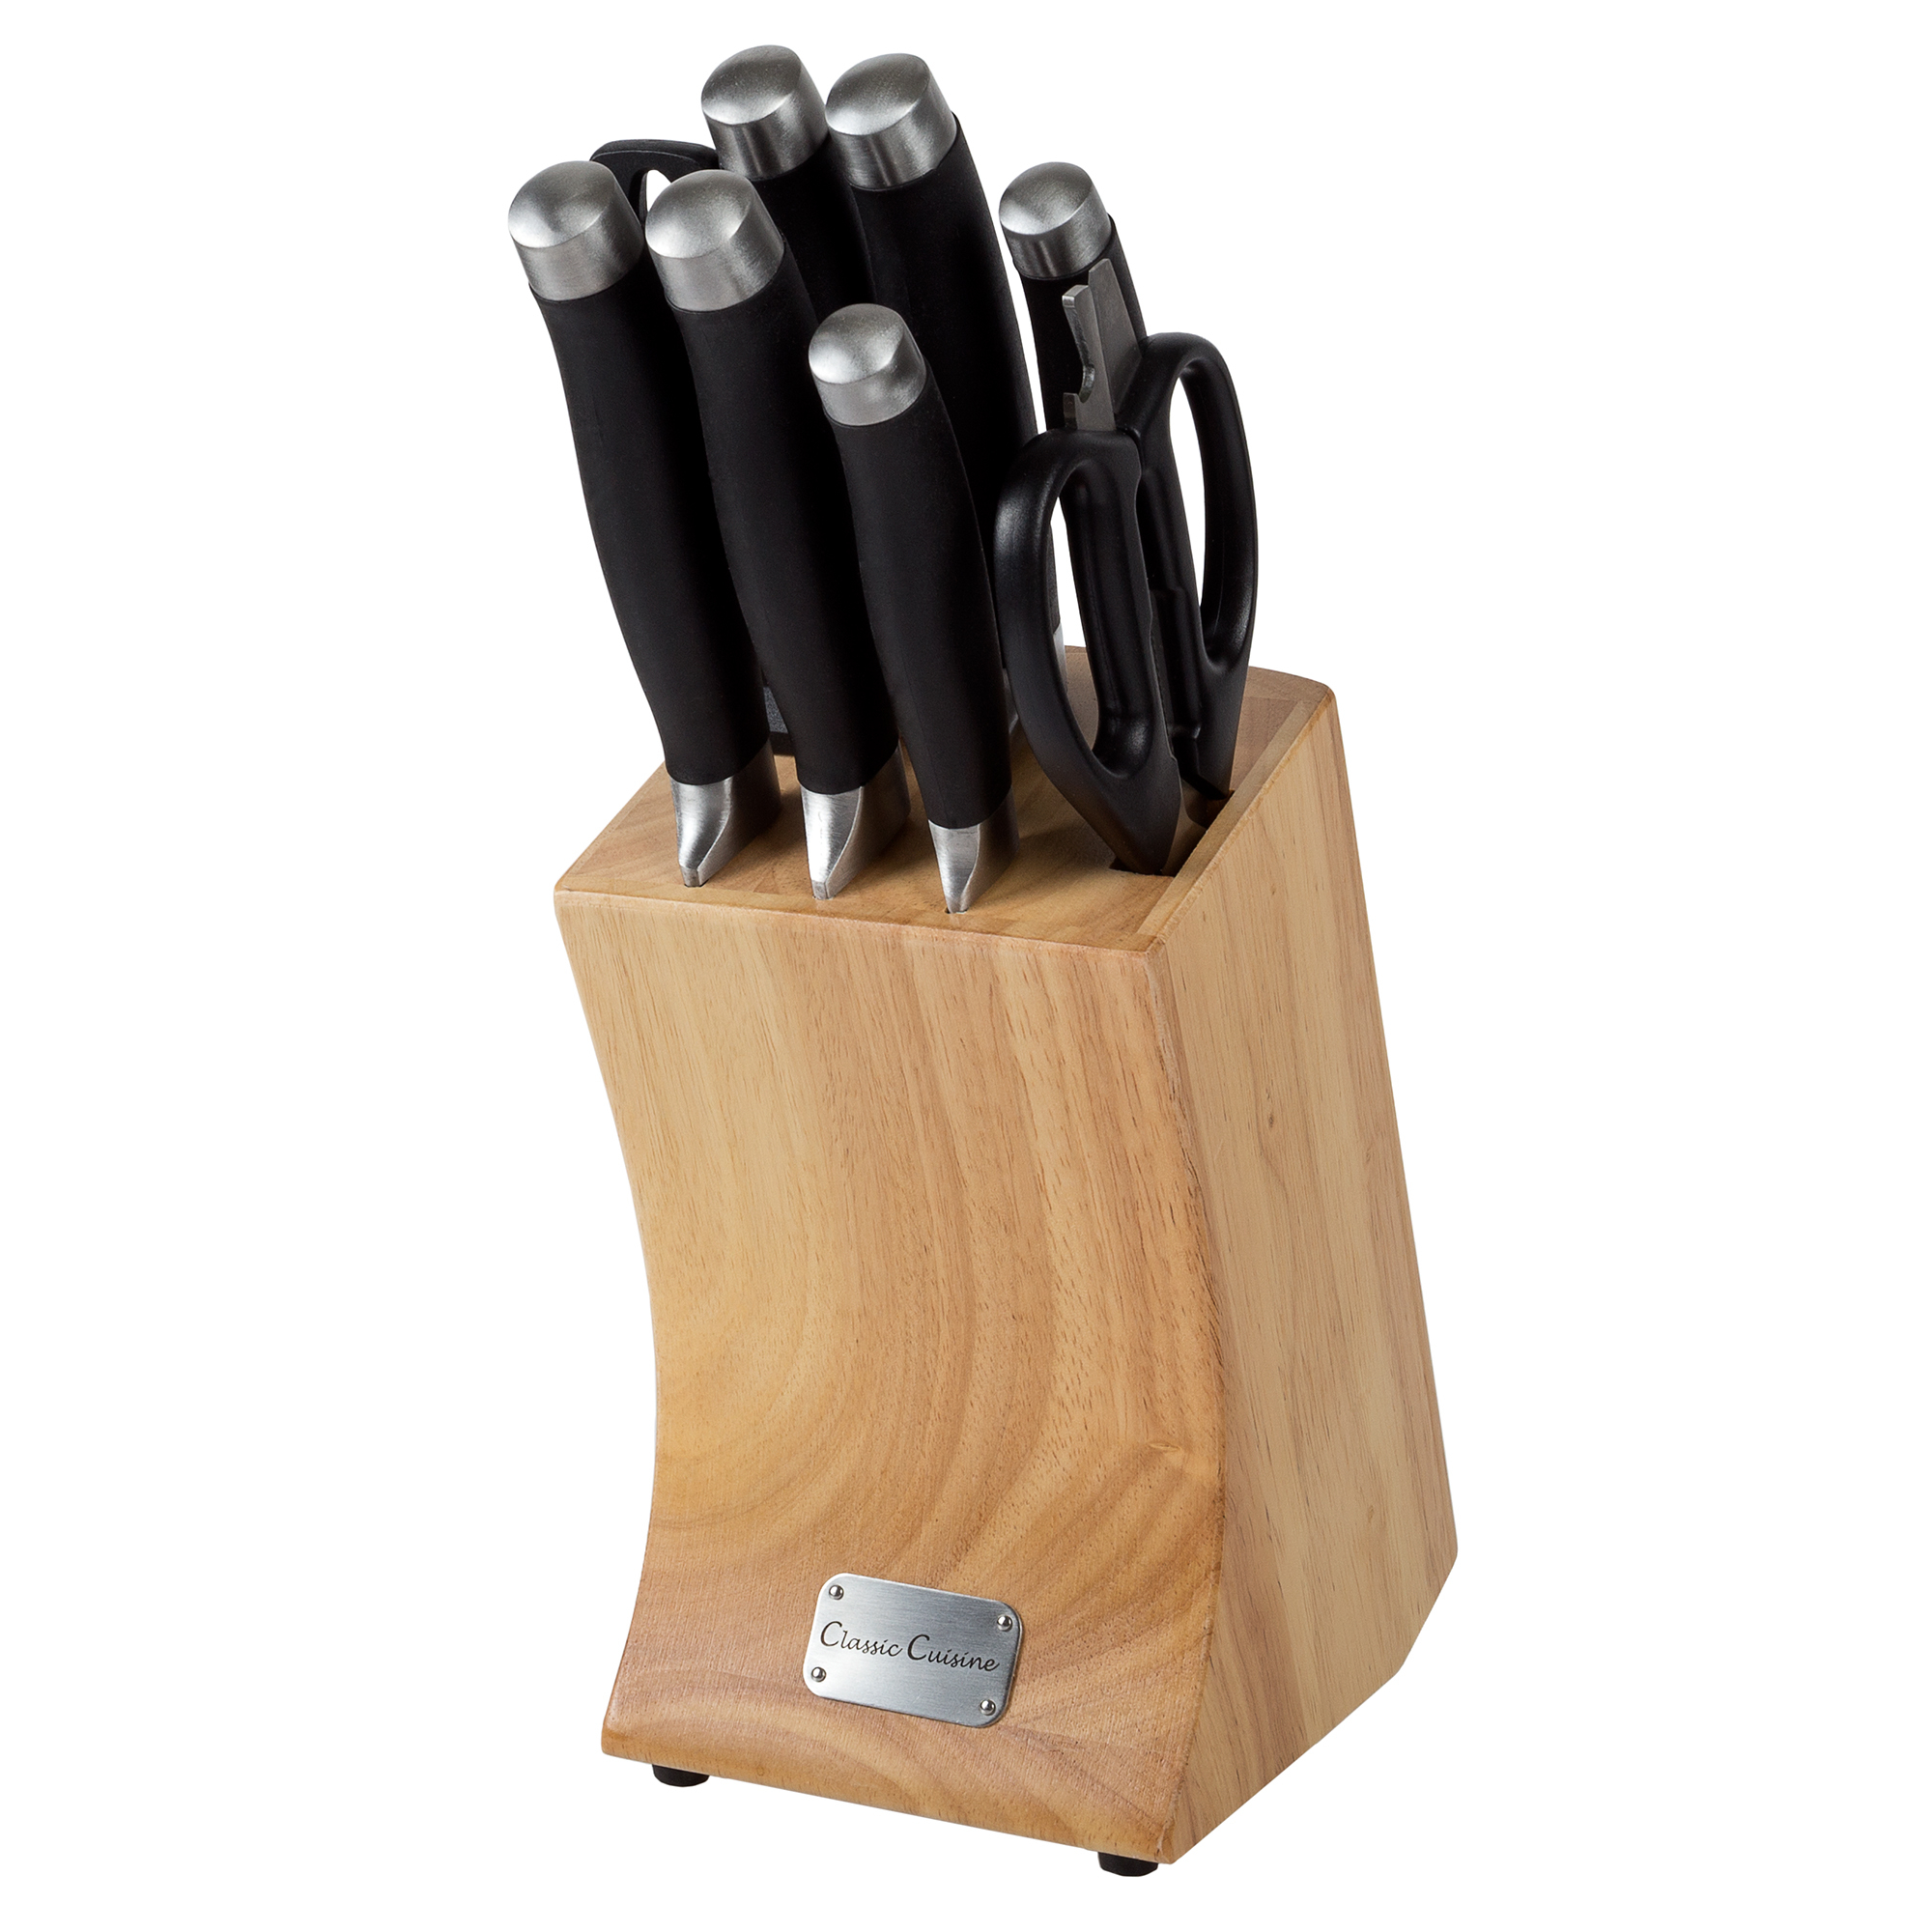 Professional Quality 9 Piece Stainless Steel Knife Set with Shears Sharpener Chef Bread Santoku Filet Paring Knives and Wood Block